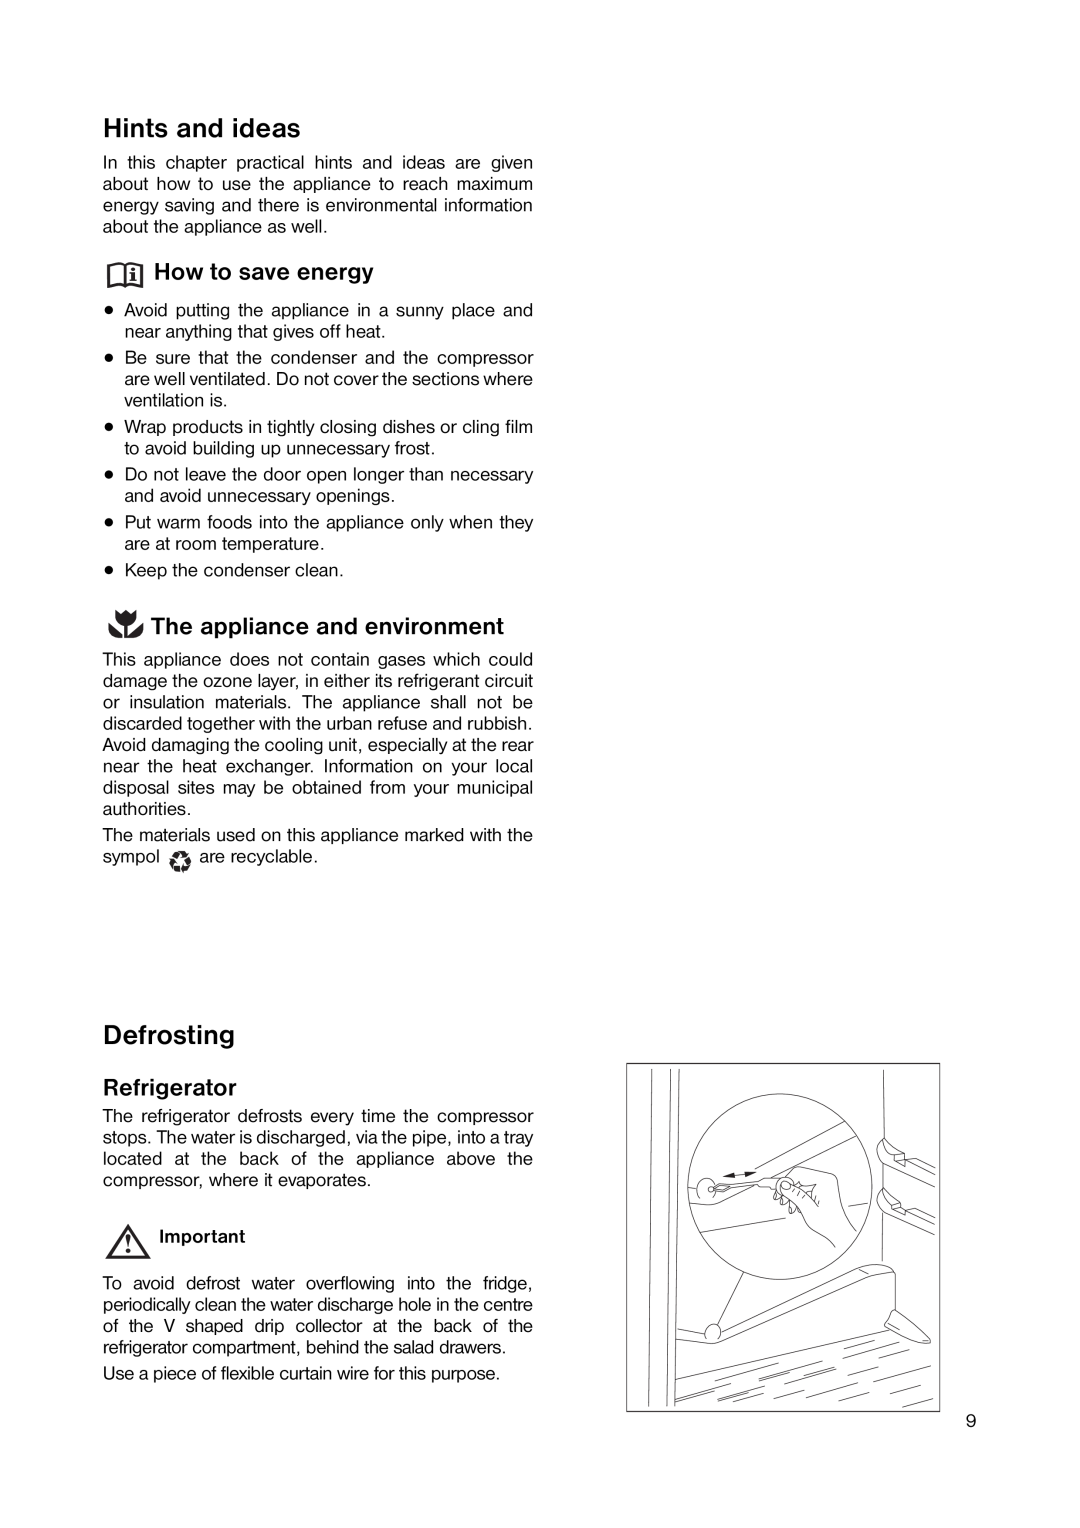 Zanussi ZERB 8441 manual Hints and ideas, Defrosting, How to save energy, The appliance and environment, Refrigerator 